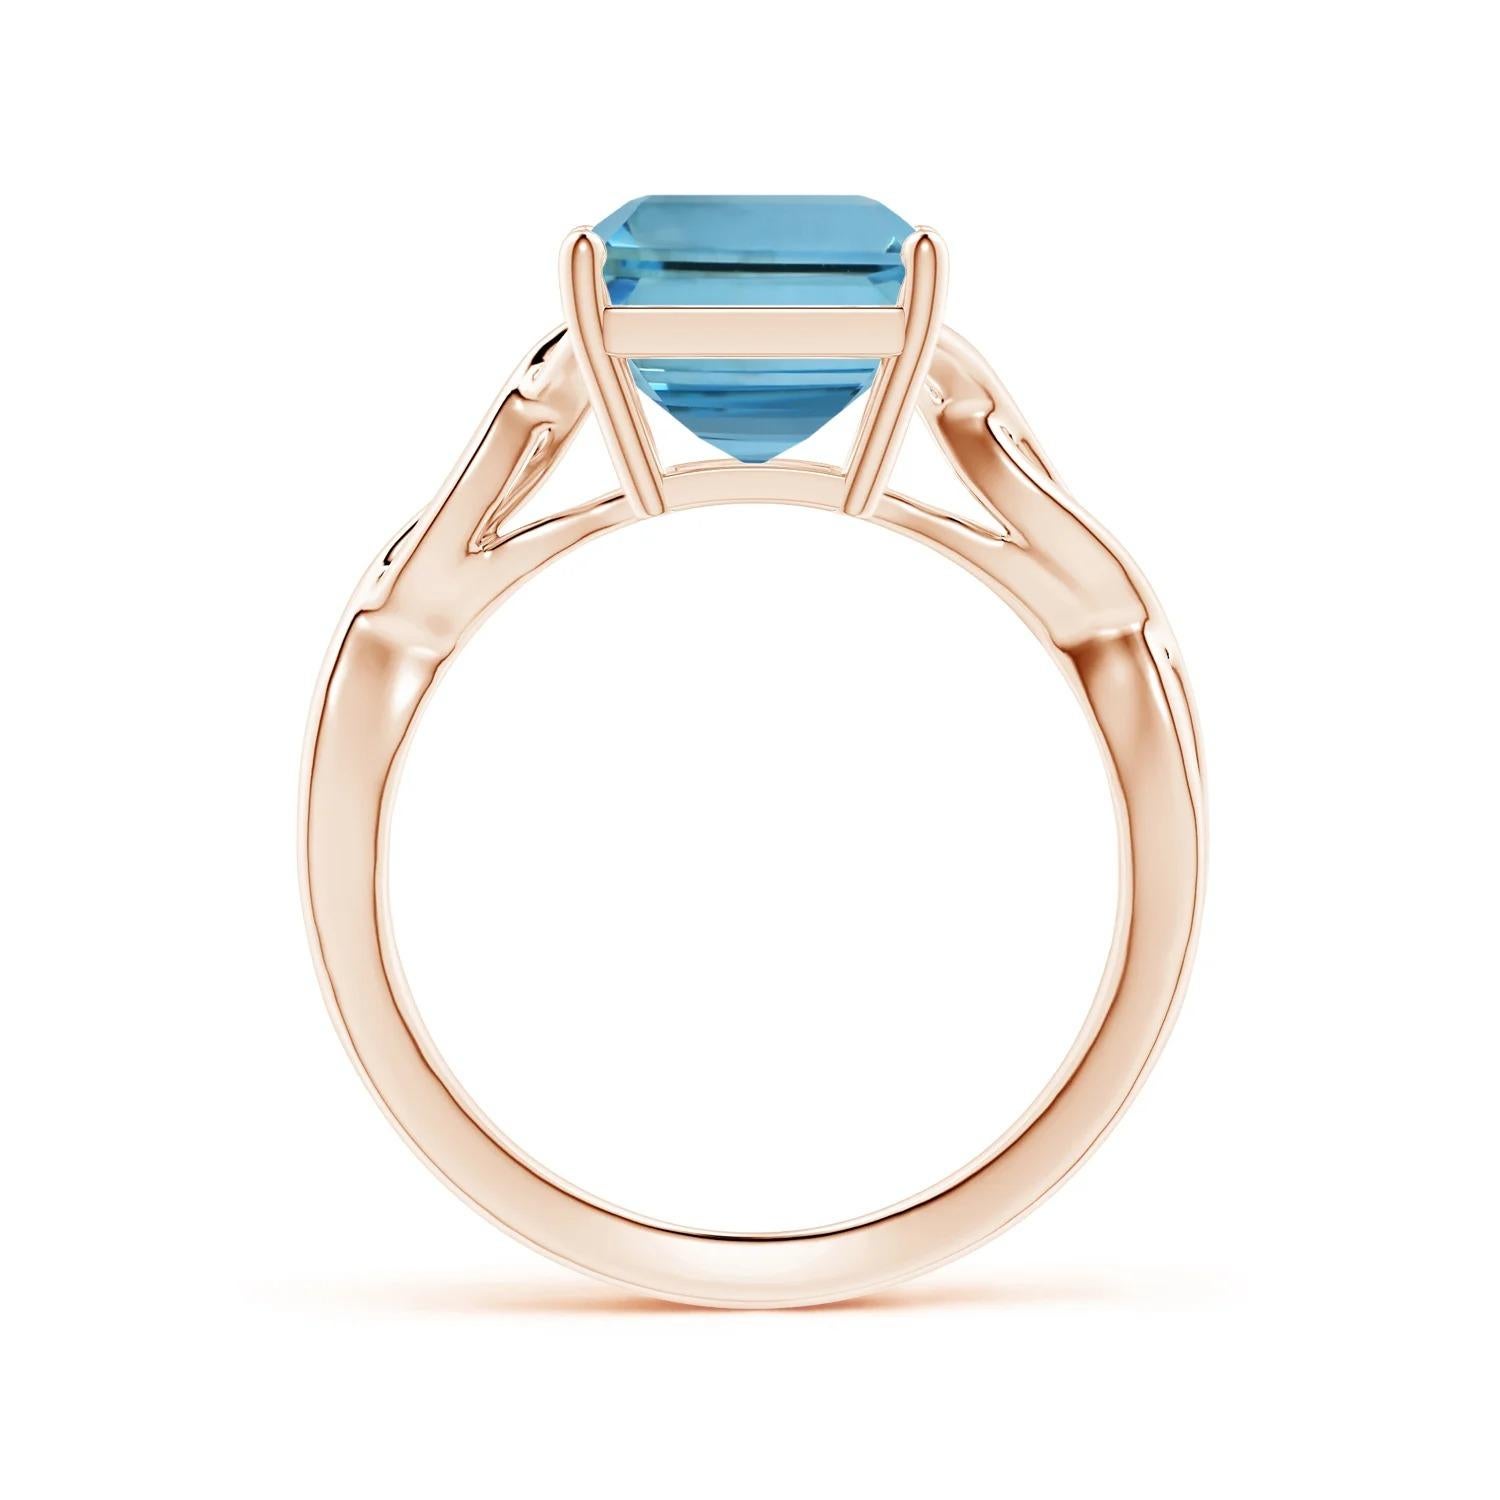 For Sale:  Angara Gia Certified Solitaire Emerald-Cut Aquamarine Ring in Rose Gold 2